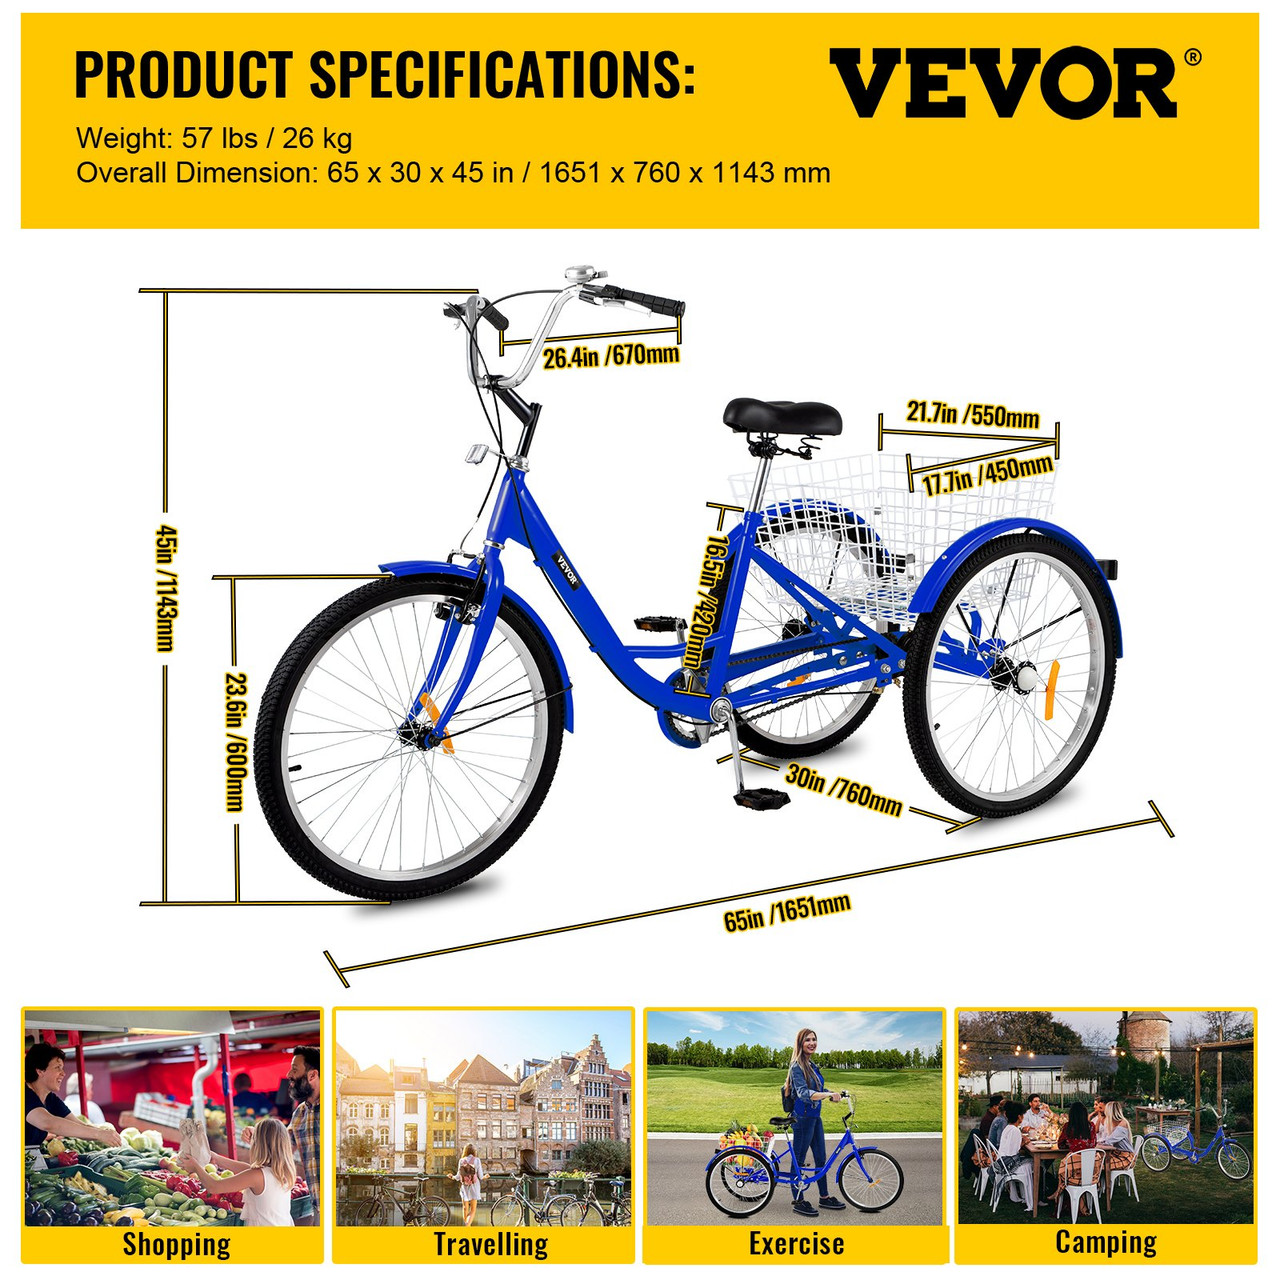 VEVOR Adult Tricycle 24" 1-Speed 3 Wheel Blue Exercise Shopping Bicycle Large Basket